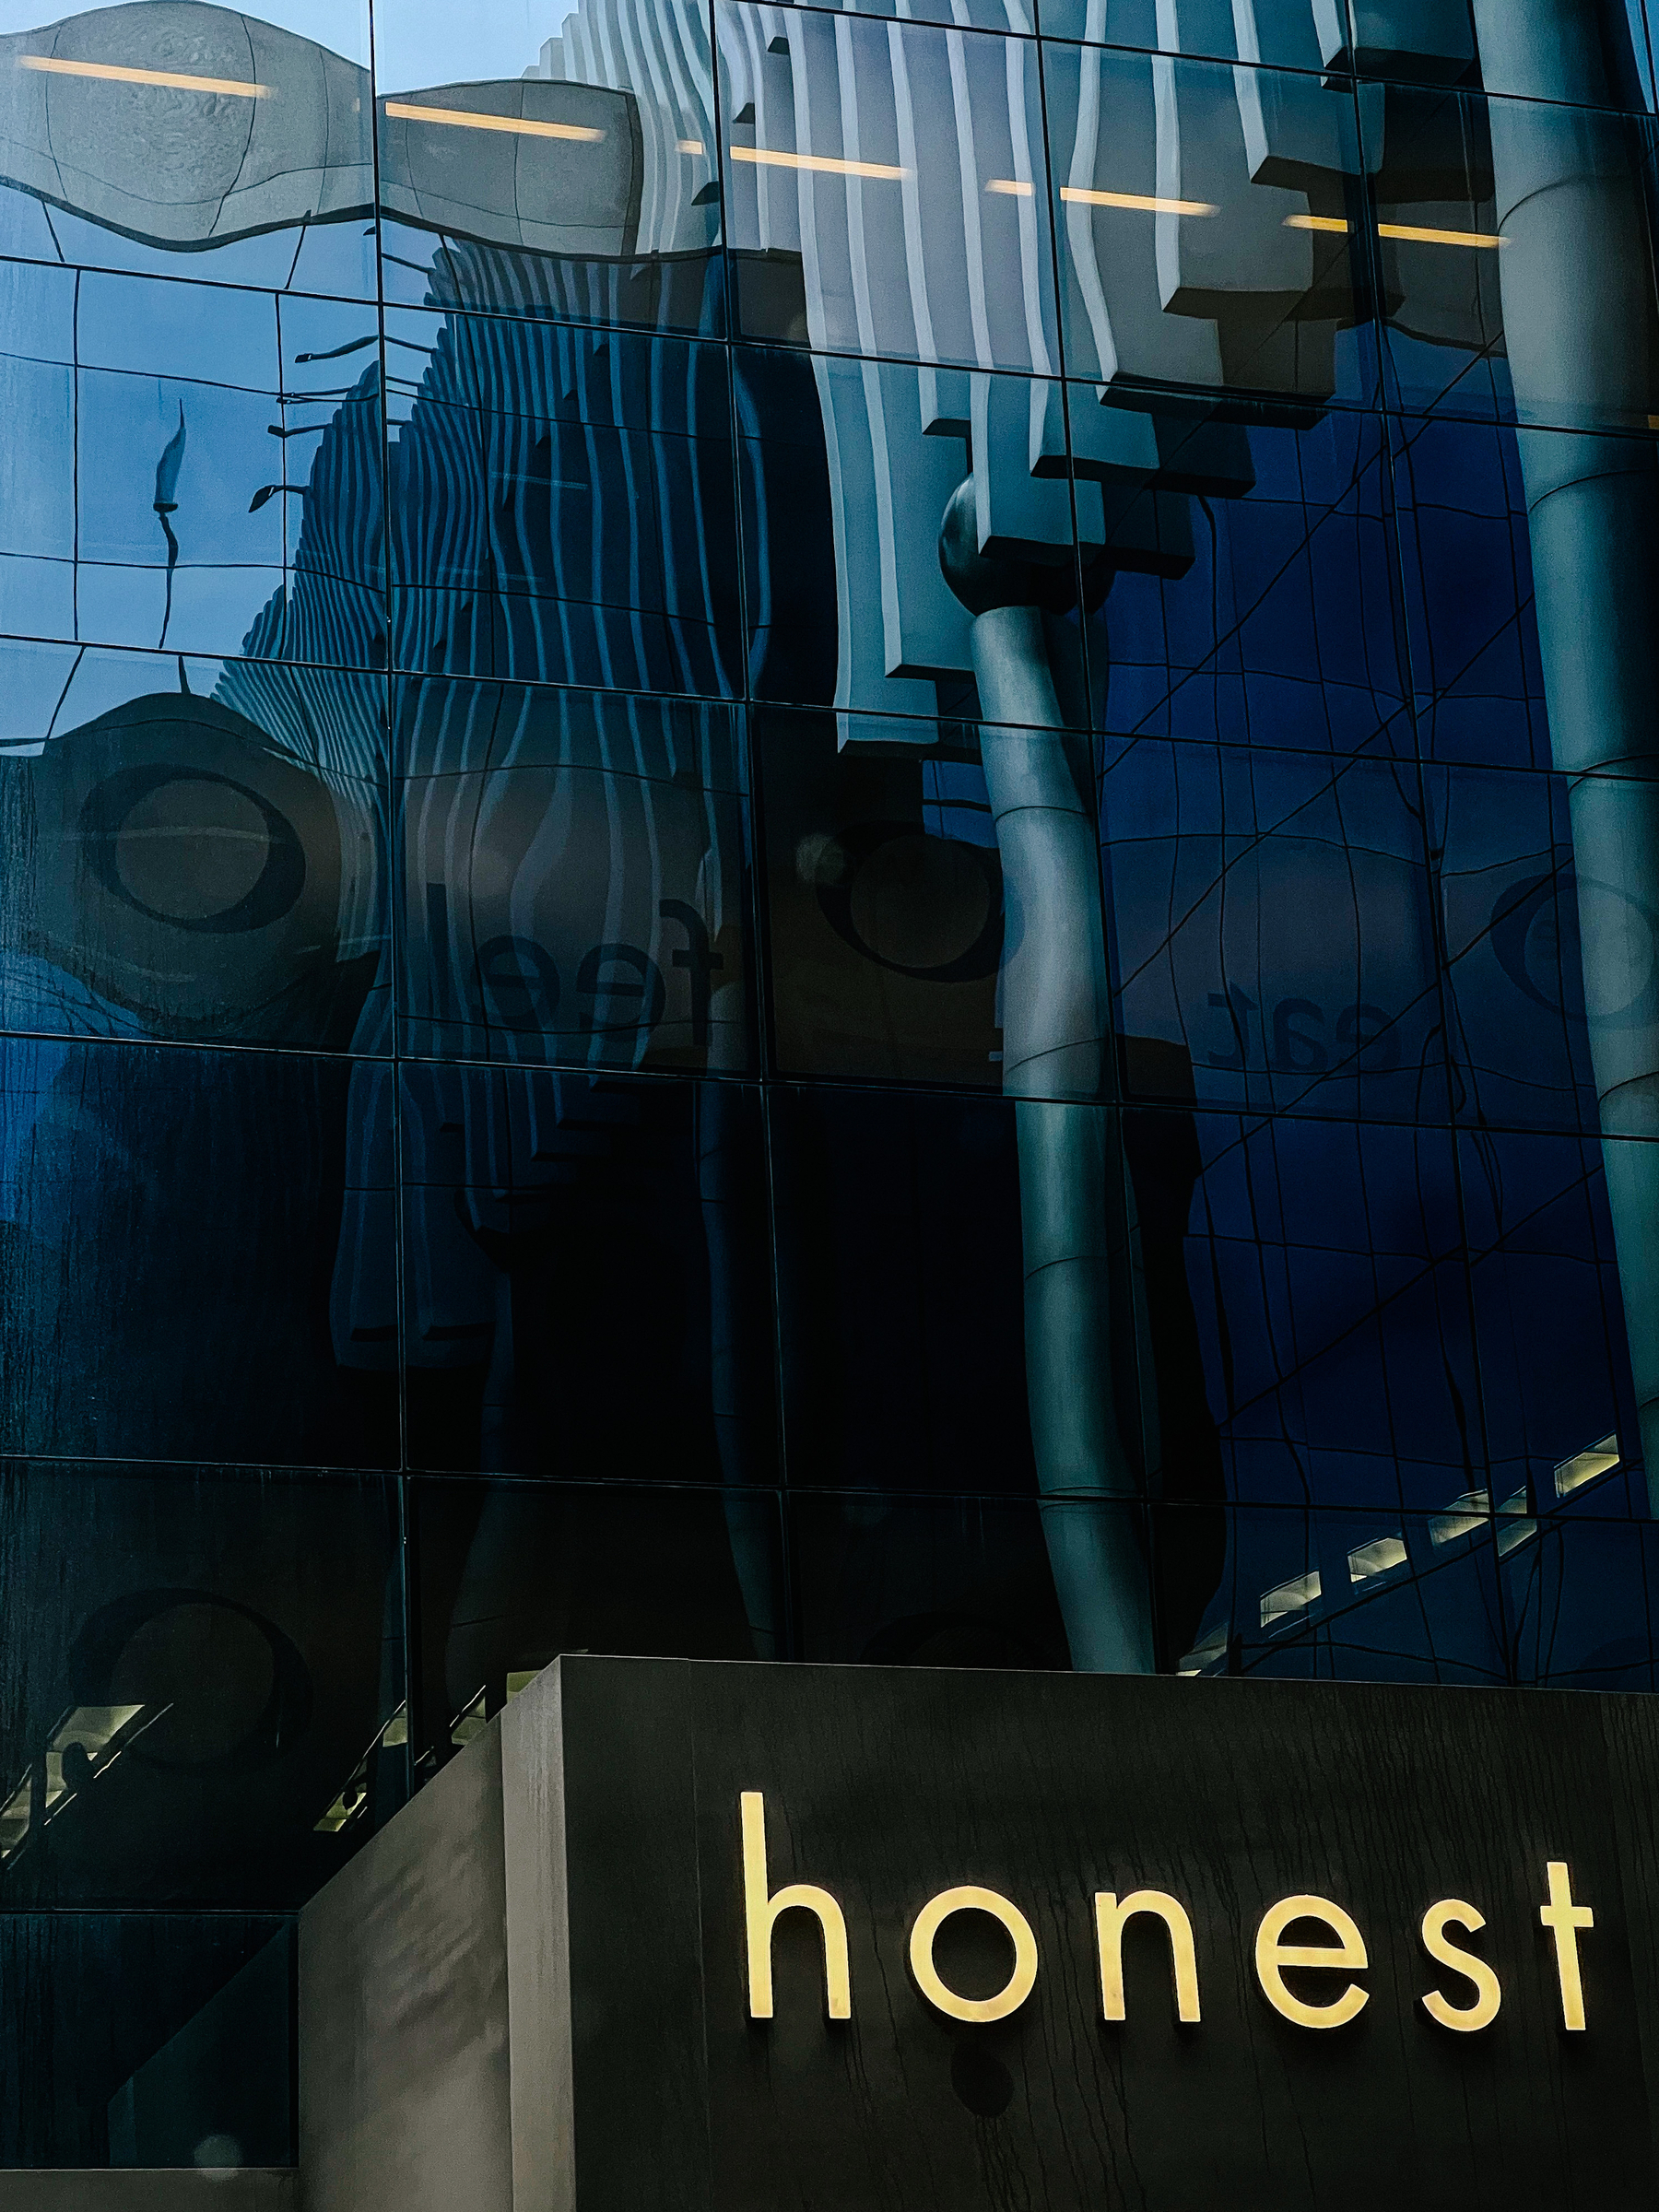 a modern building with the word “honest” in lights